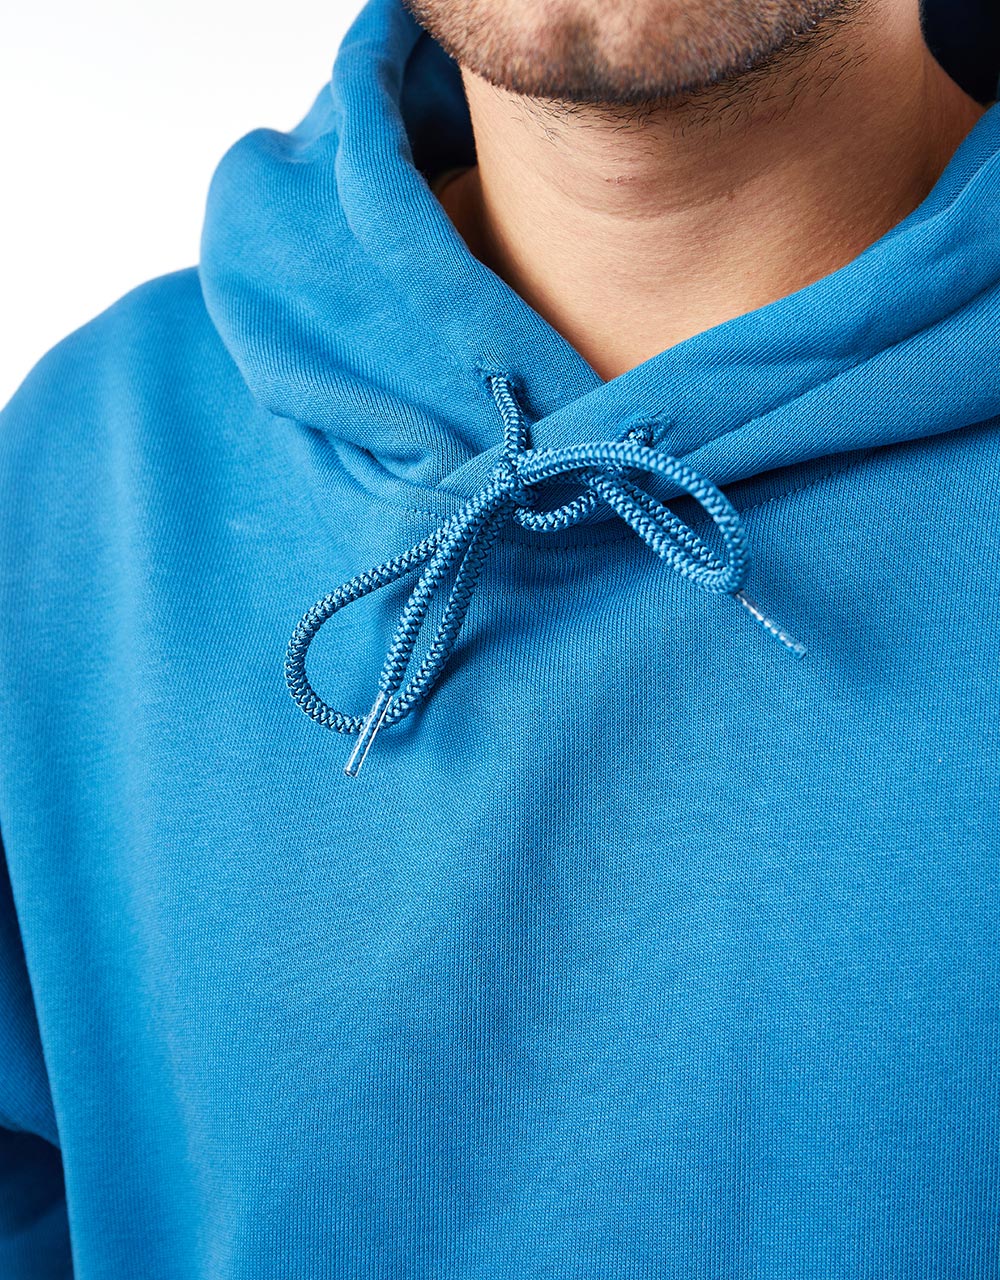 Nike SB Distorted Glimmer GFX Pullover Hoodie - Industrial Blue